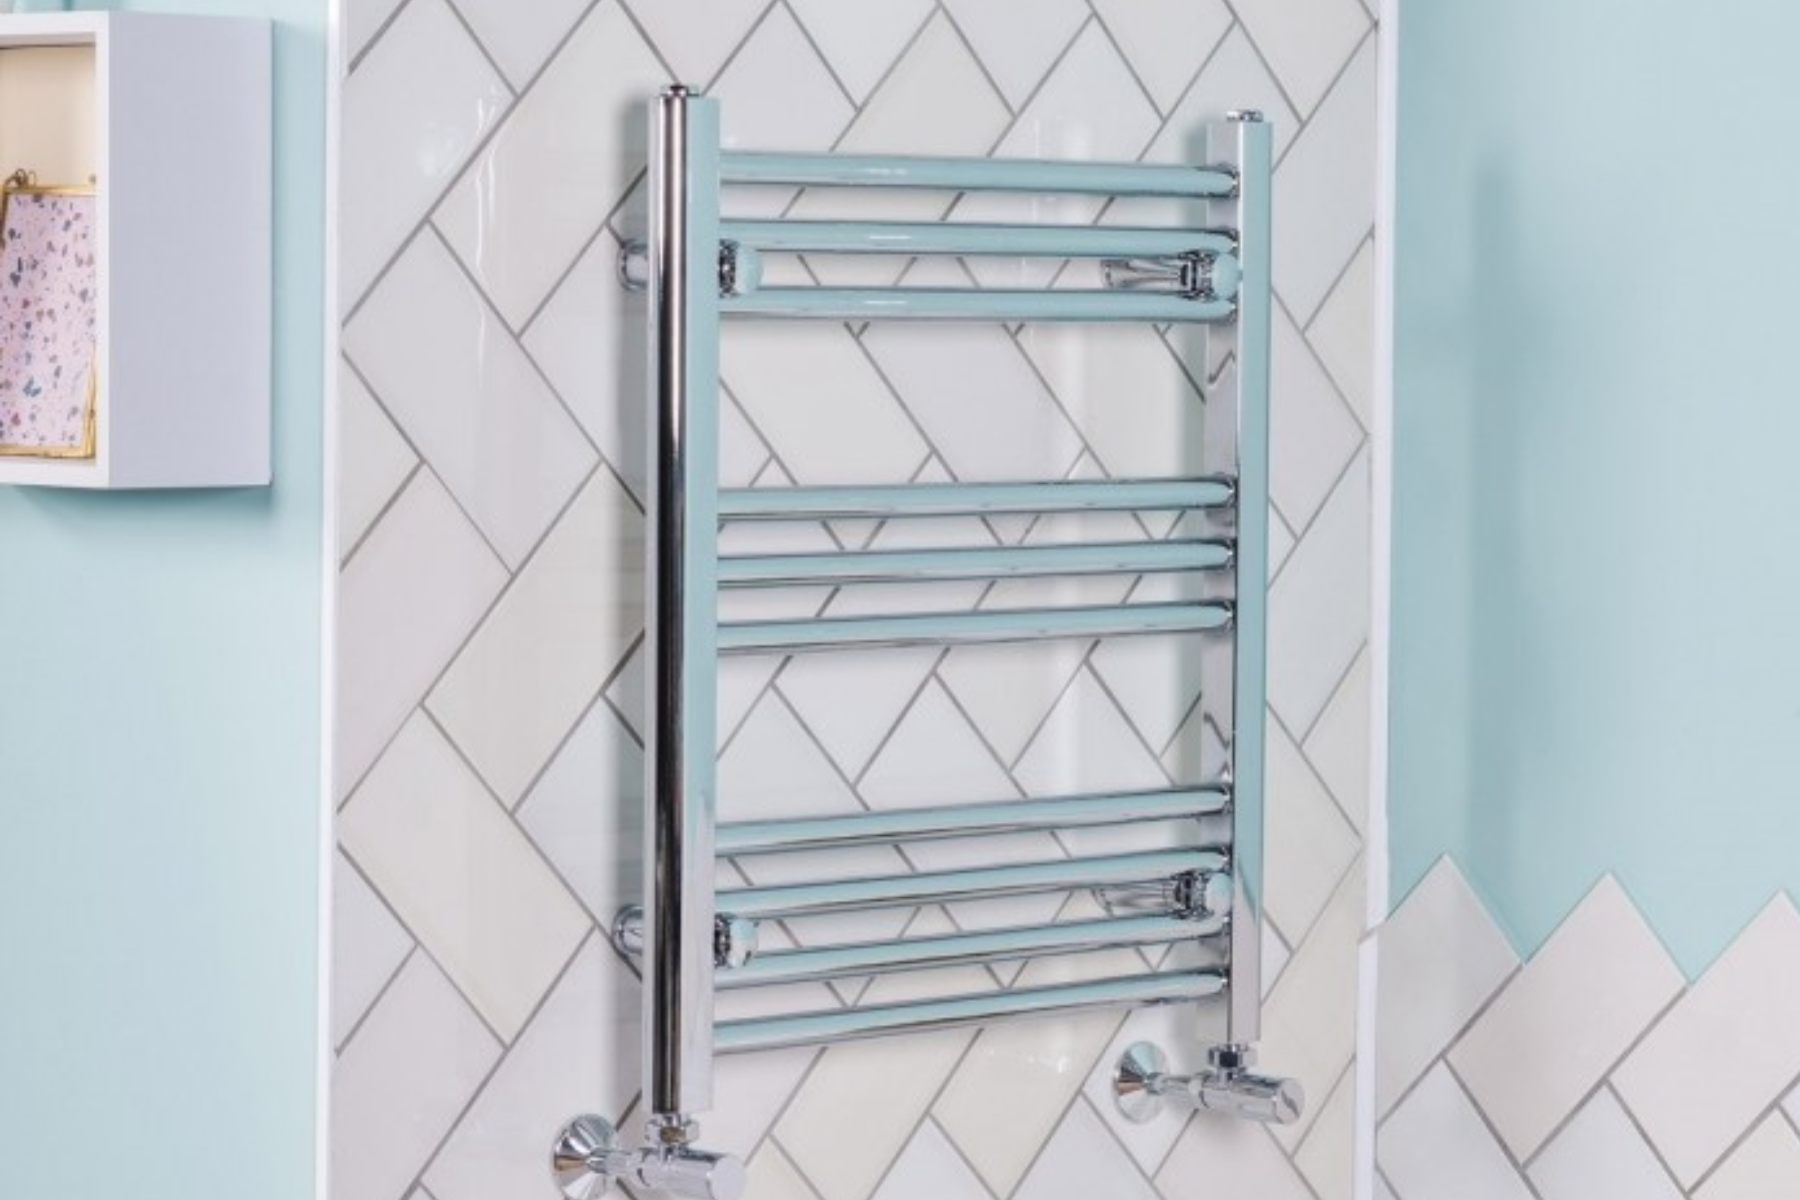 Heated Towel Rail Mounted Against Tiled Wall